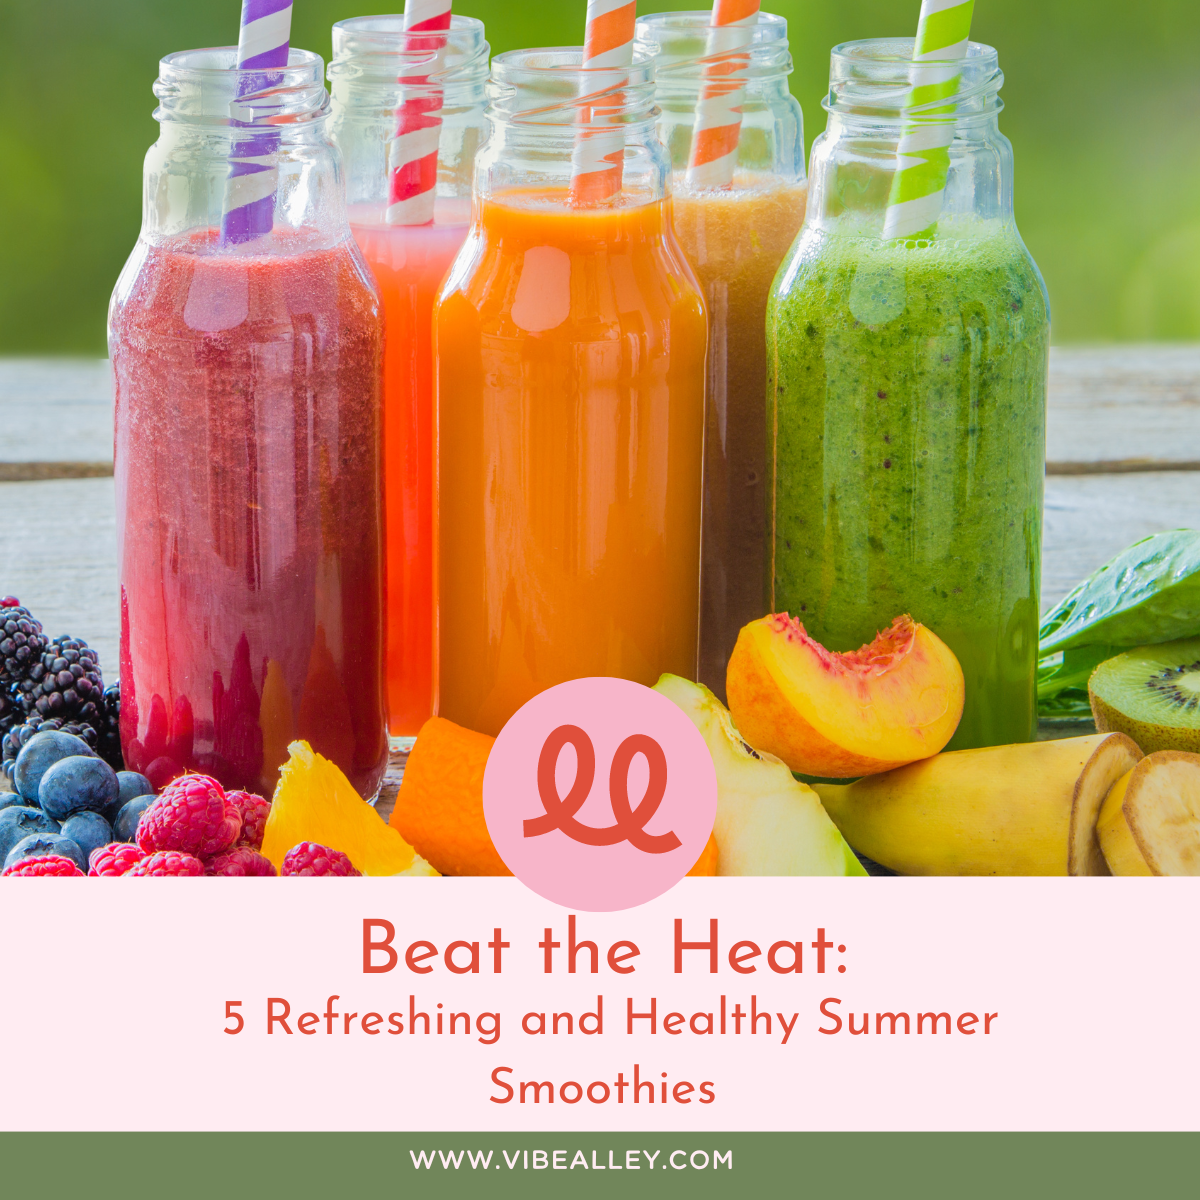 Beat the Heat: 5 Refreshing and Healthy Summer Smoothie